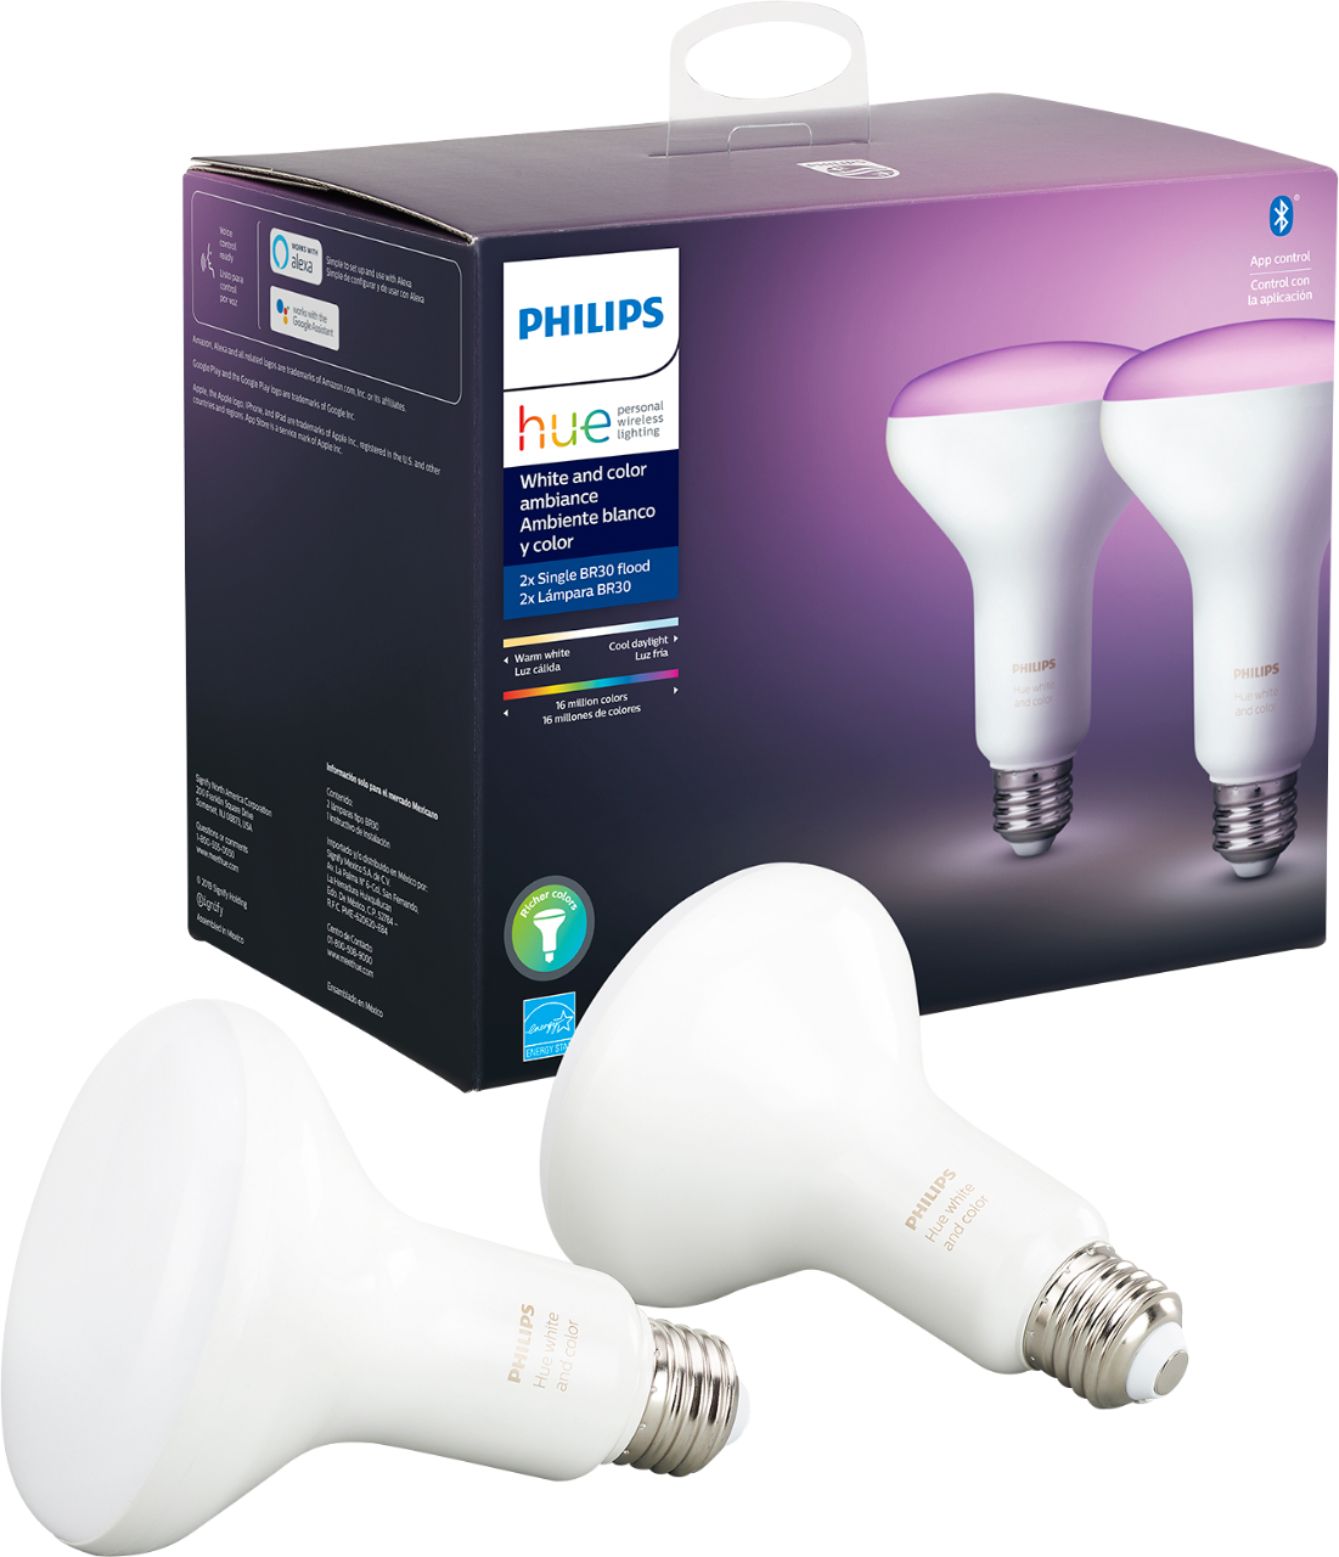 Signify addresses Hue brightness by doubling white bulb lumens